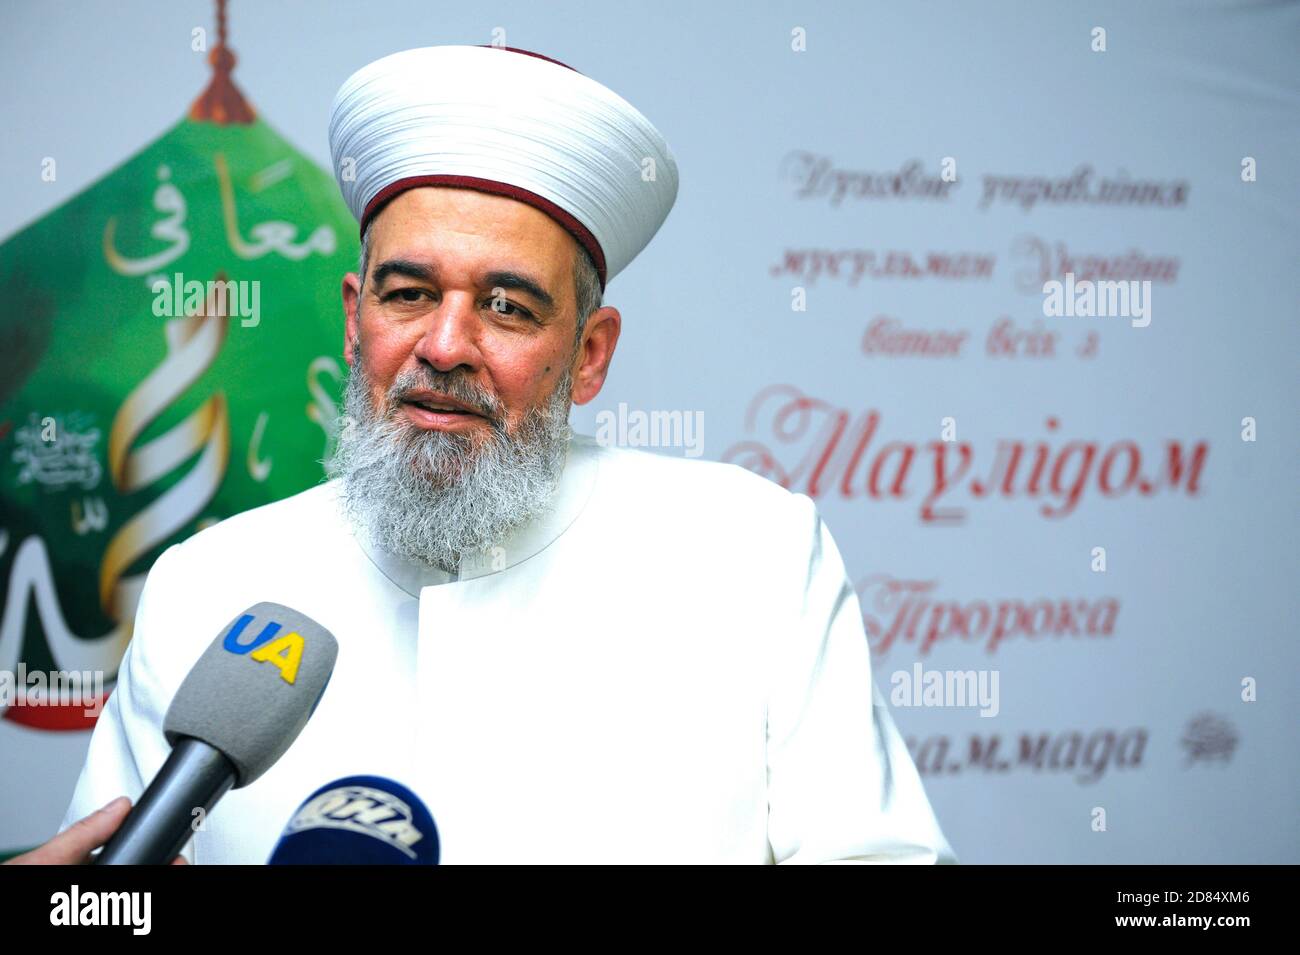 Mufti of Ukraine Sheikh Akhmed Tamim gives an interview during celebrating Islamic holiday Mawlid Stock Photo